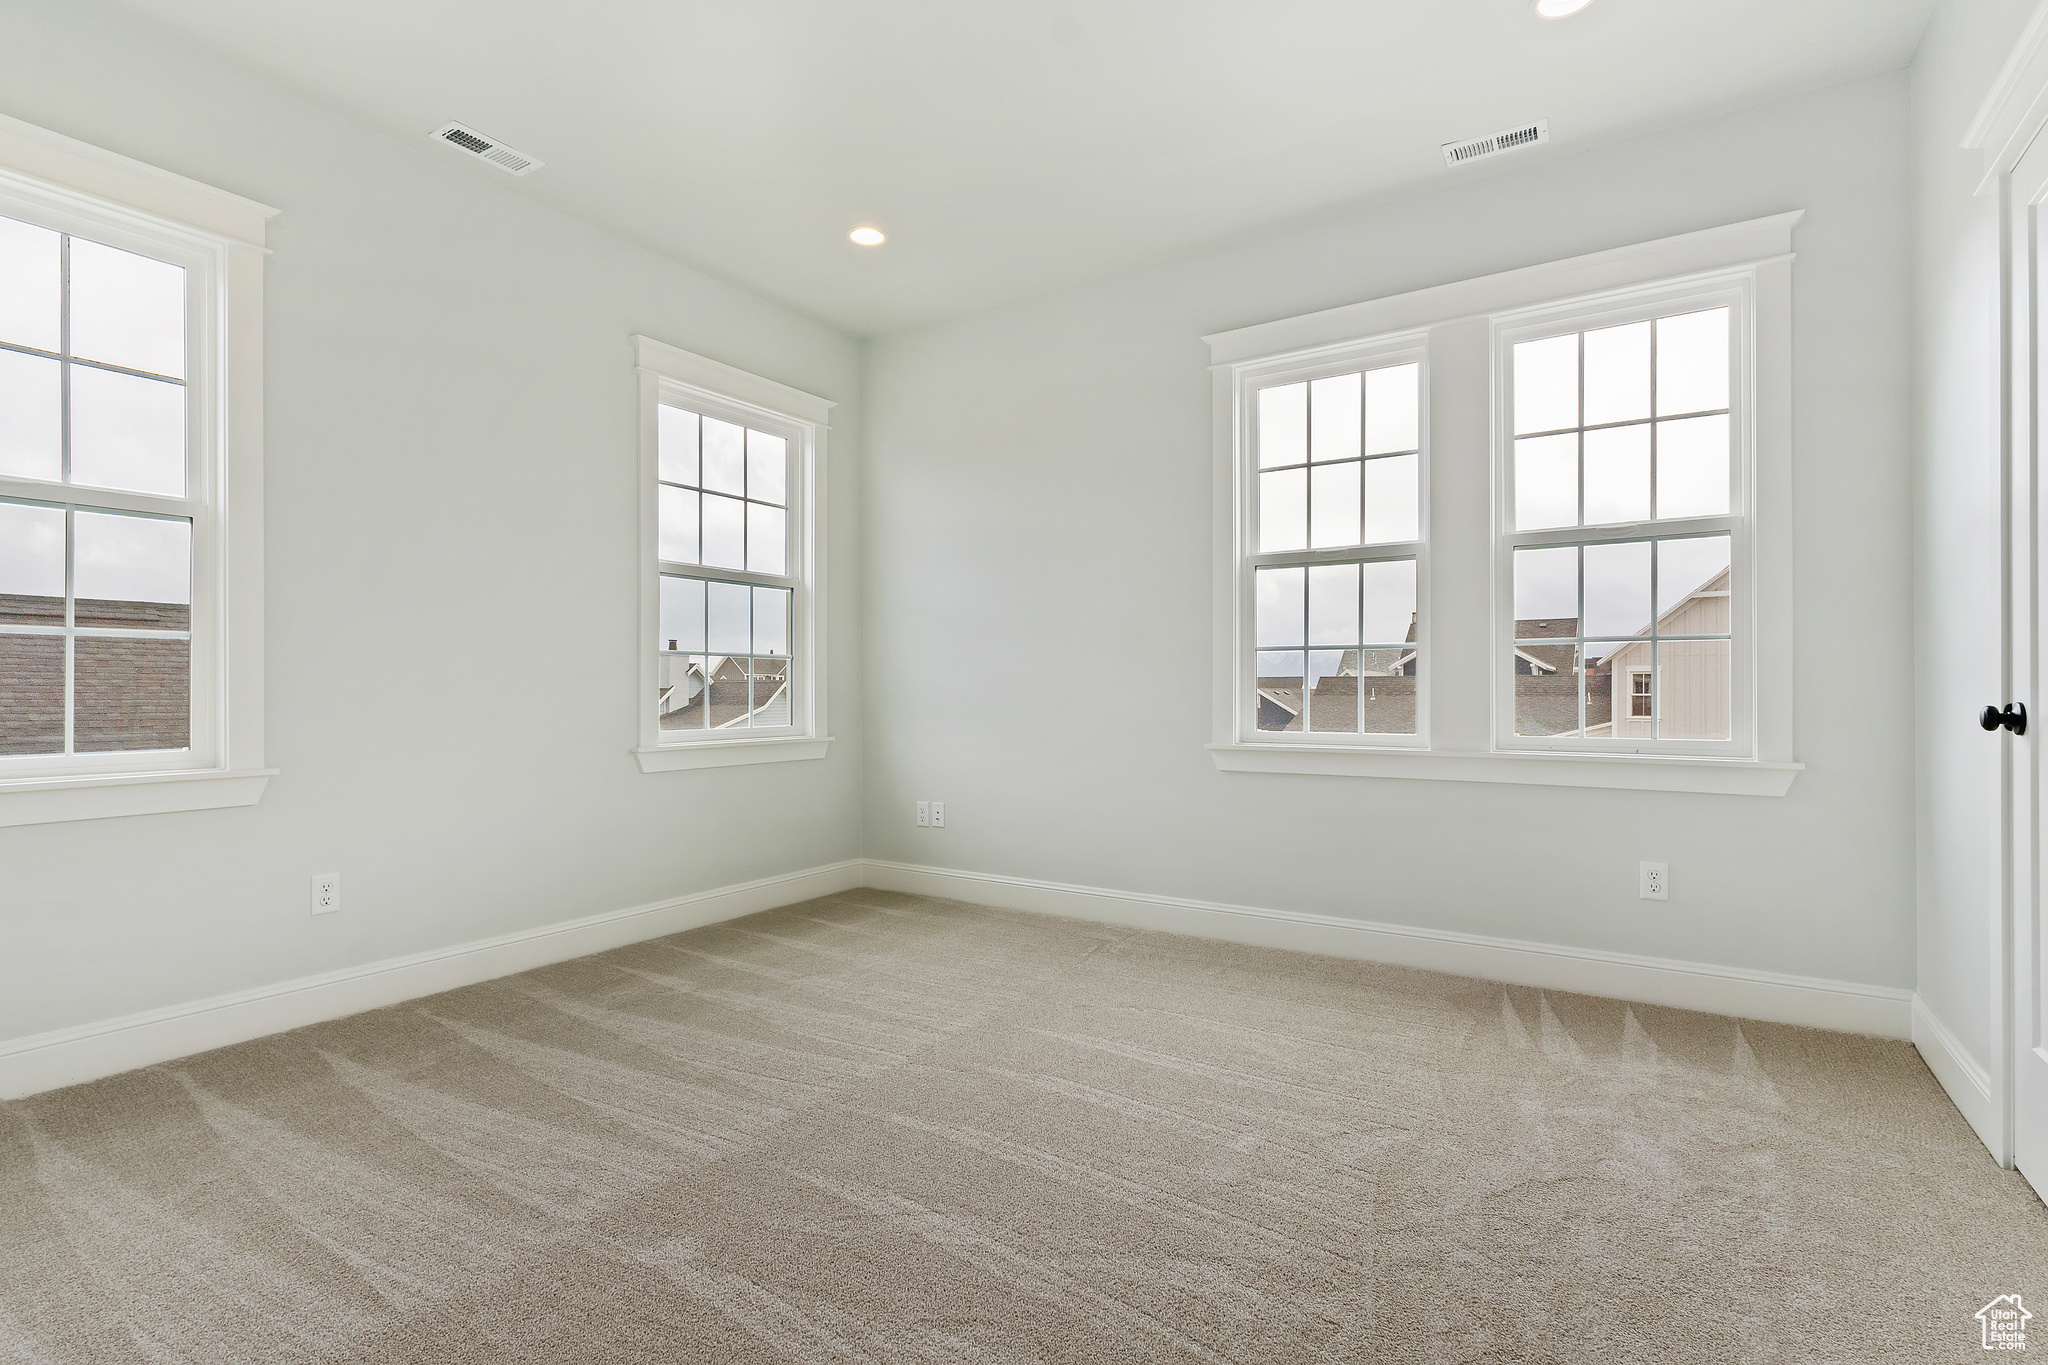 Master bedroom featuring plenty of natural light and light colored carpet